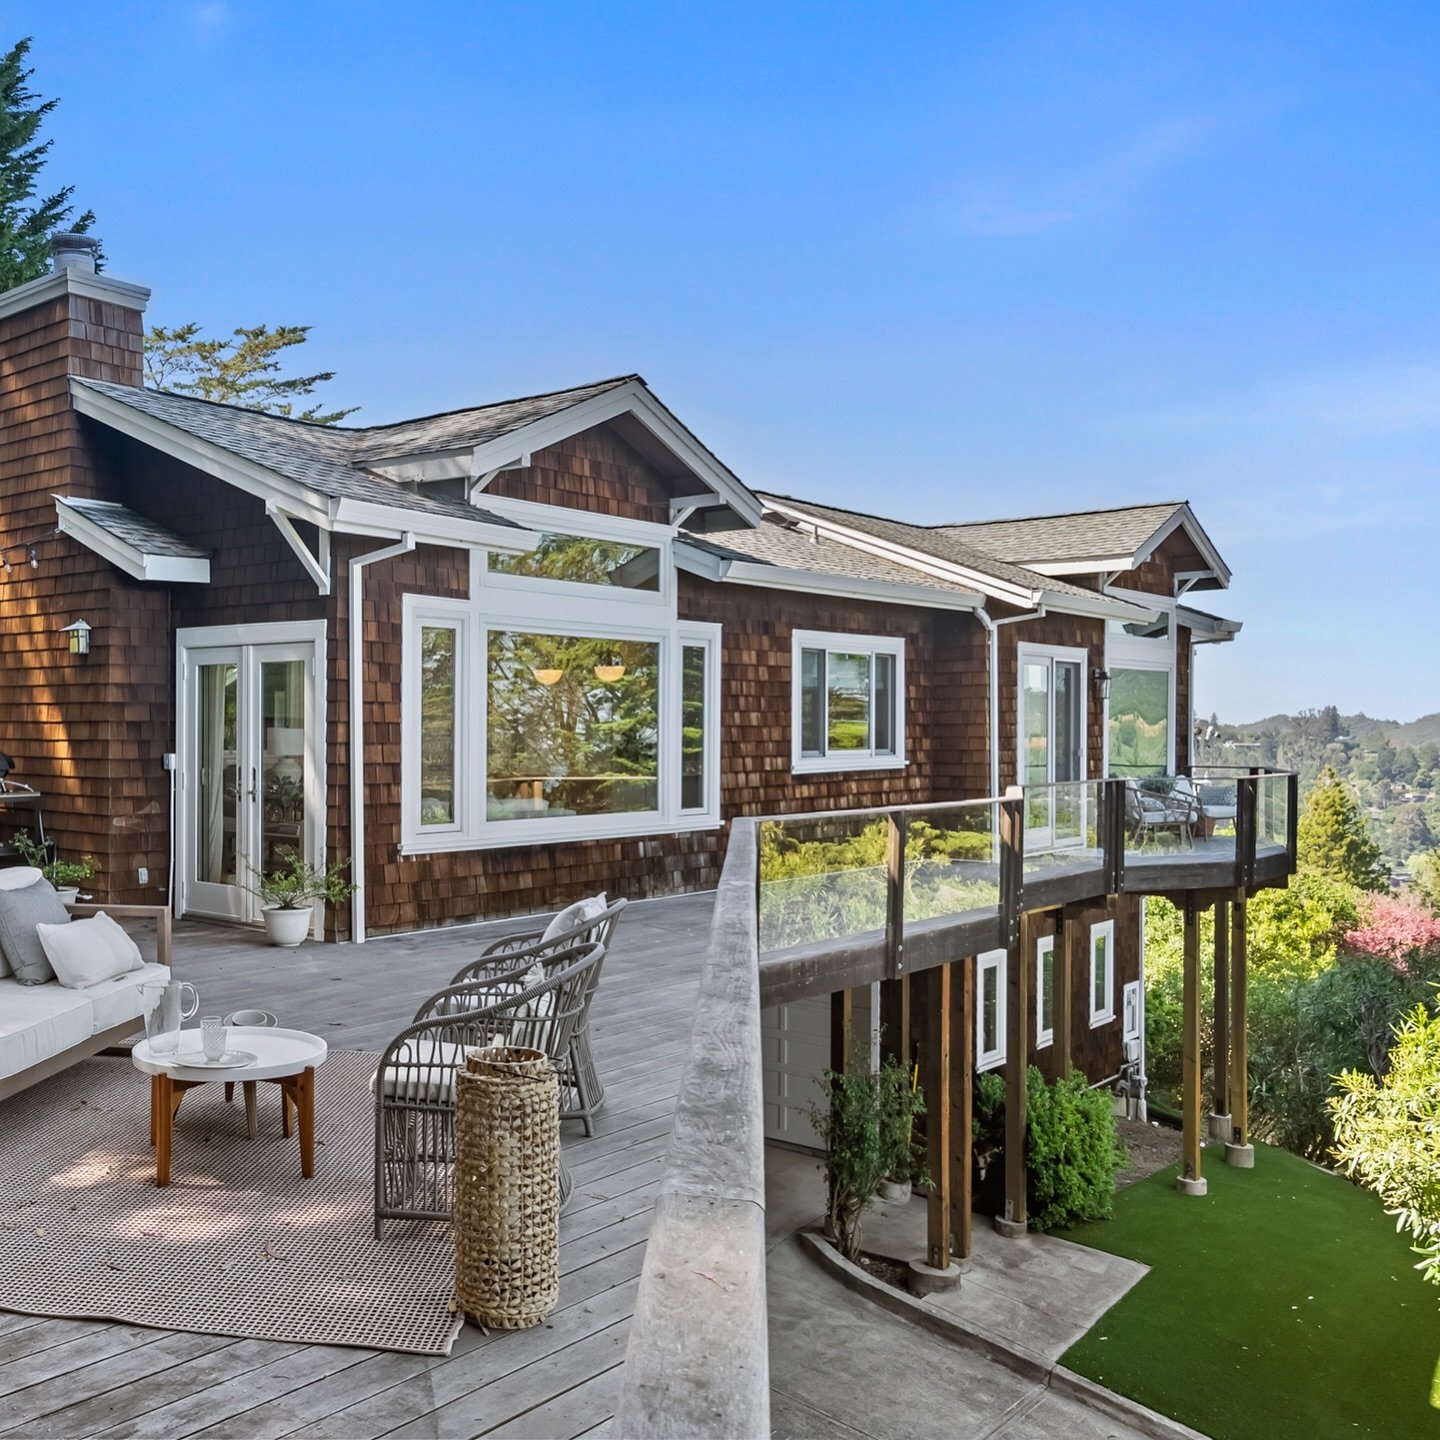 Welcome to 30 Sunnycrest Avenue, a bright and open 4-bed, 3-bath contemporary craftsman offering spectacular panoramic bay views from San Francisco to Mount Diablo and Mount Tamalpais. 

This thoughtfully designed 3,463 square foot home captivates wi